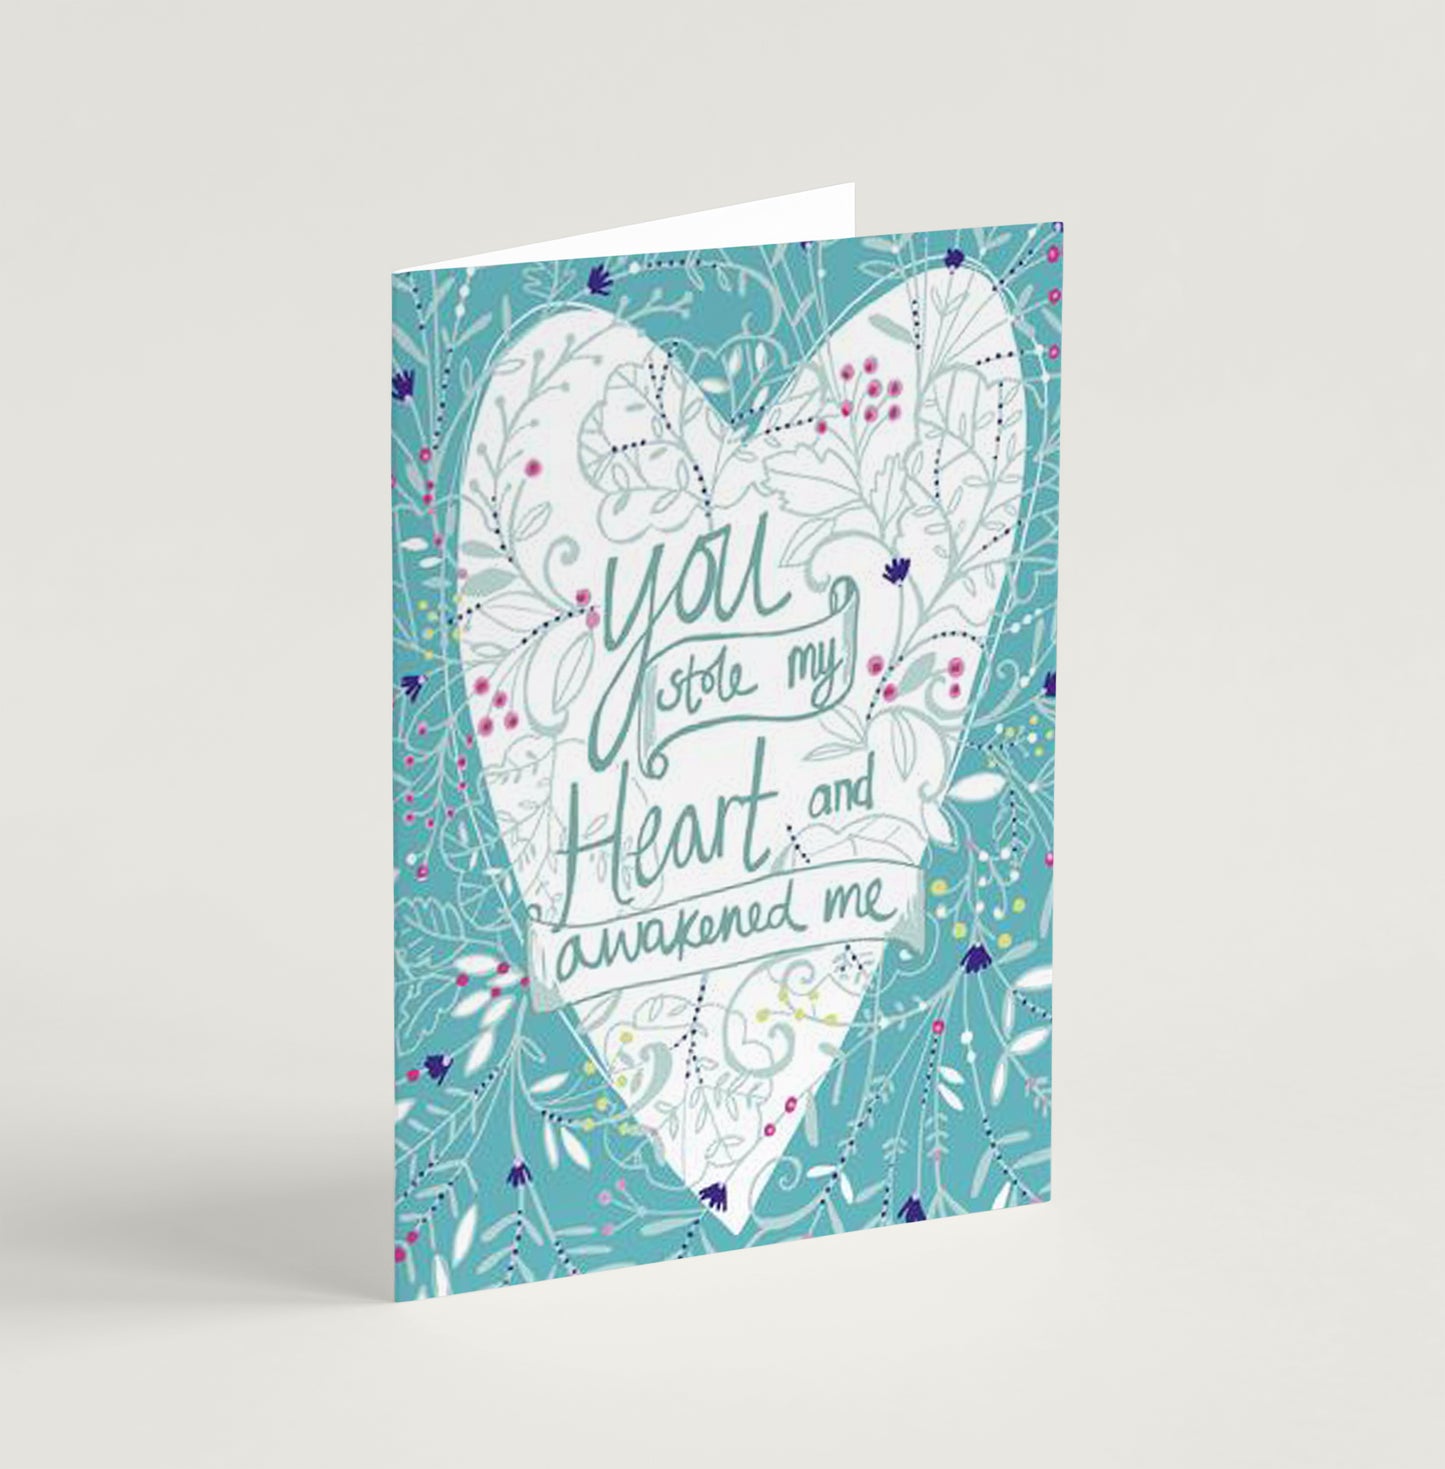 'You Stole My Heart'  greeting card by Emily Kelly